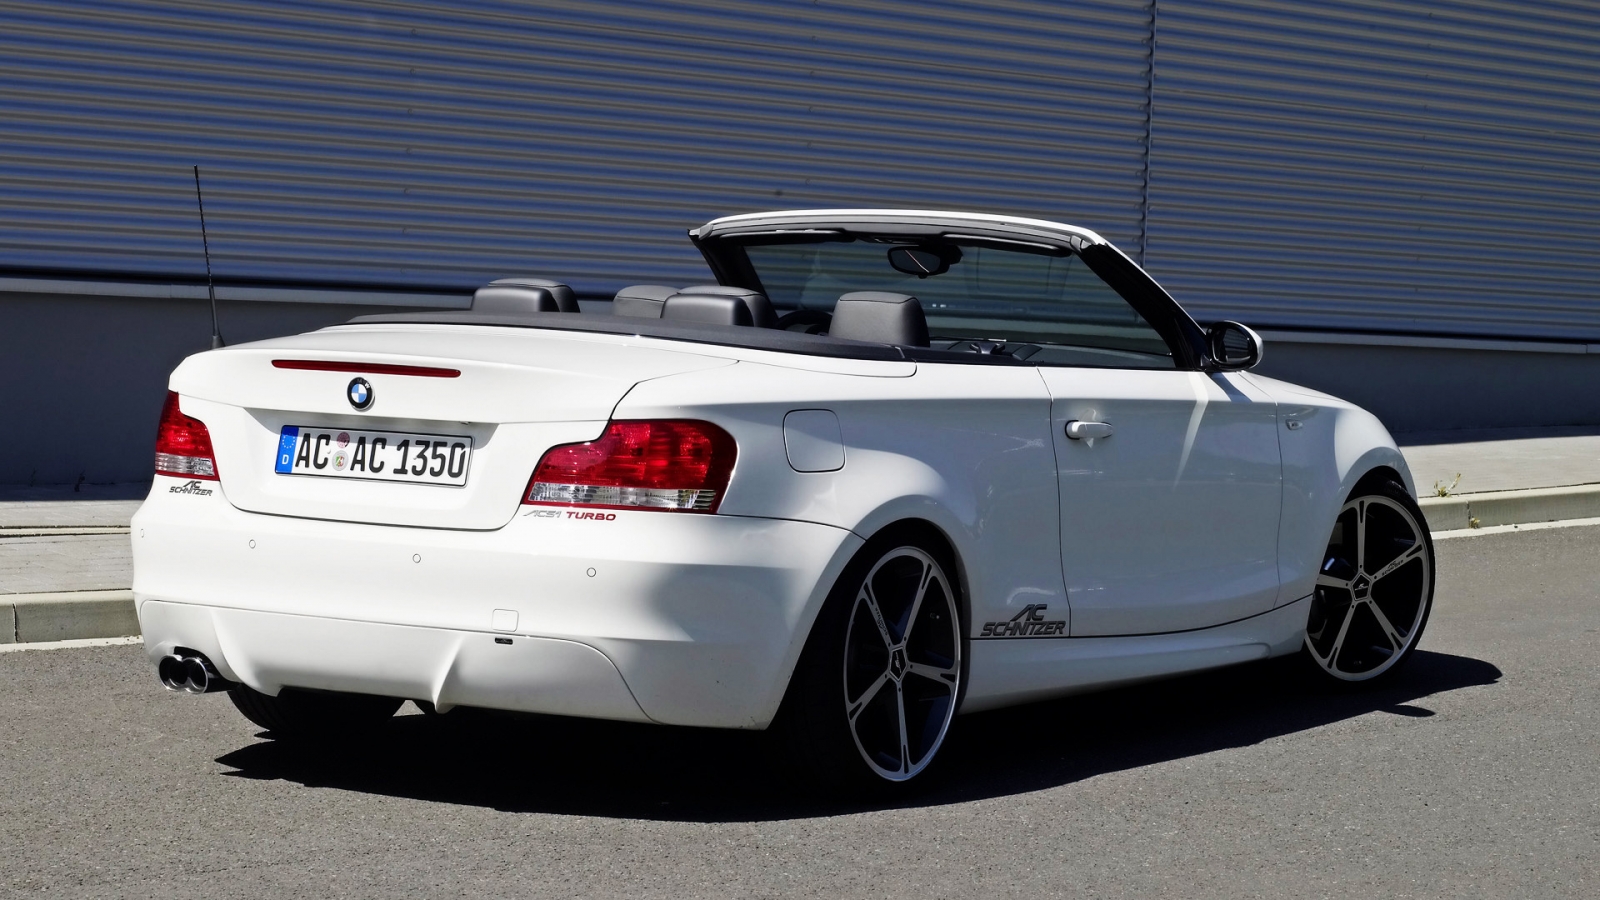 BMW 1 Series Convertible Rear Angle for 1600 x 900 HDTV resolution